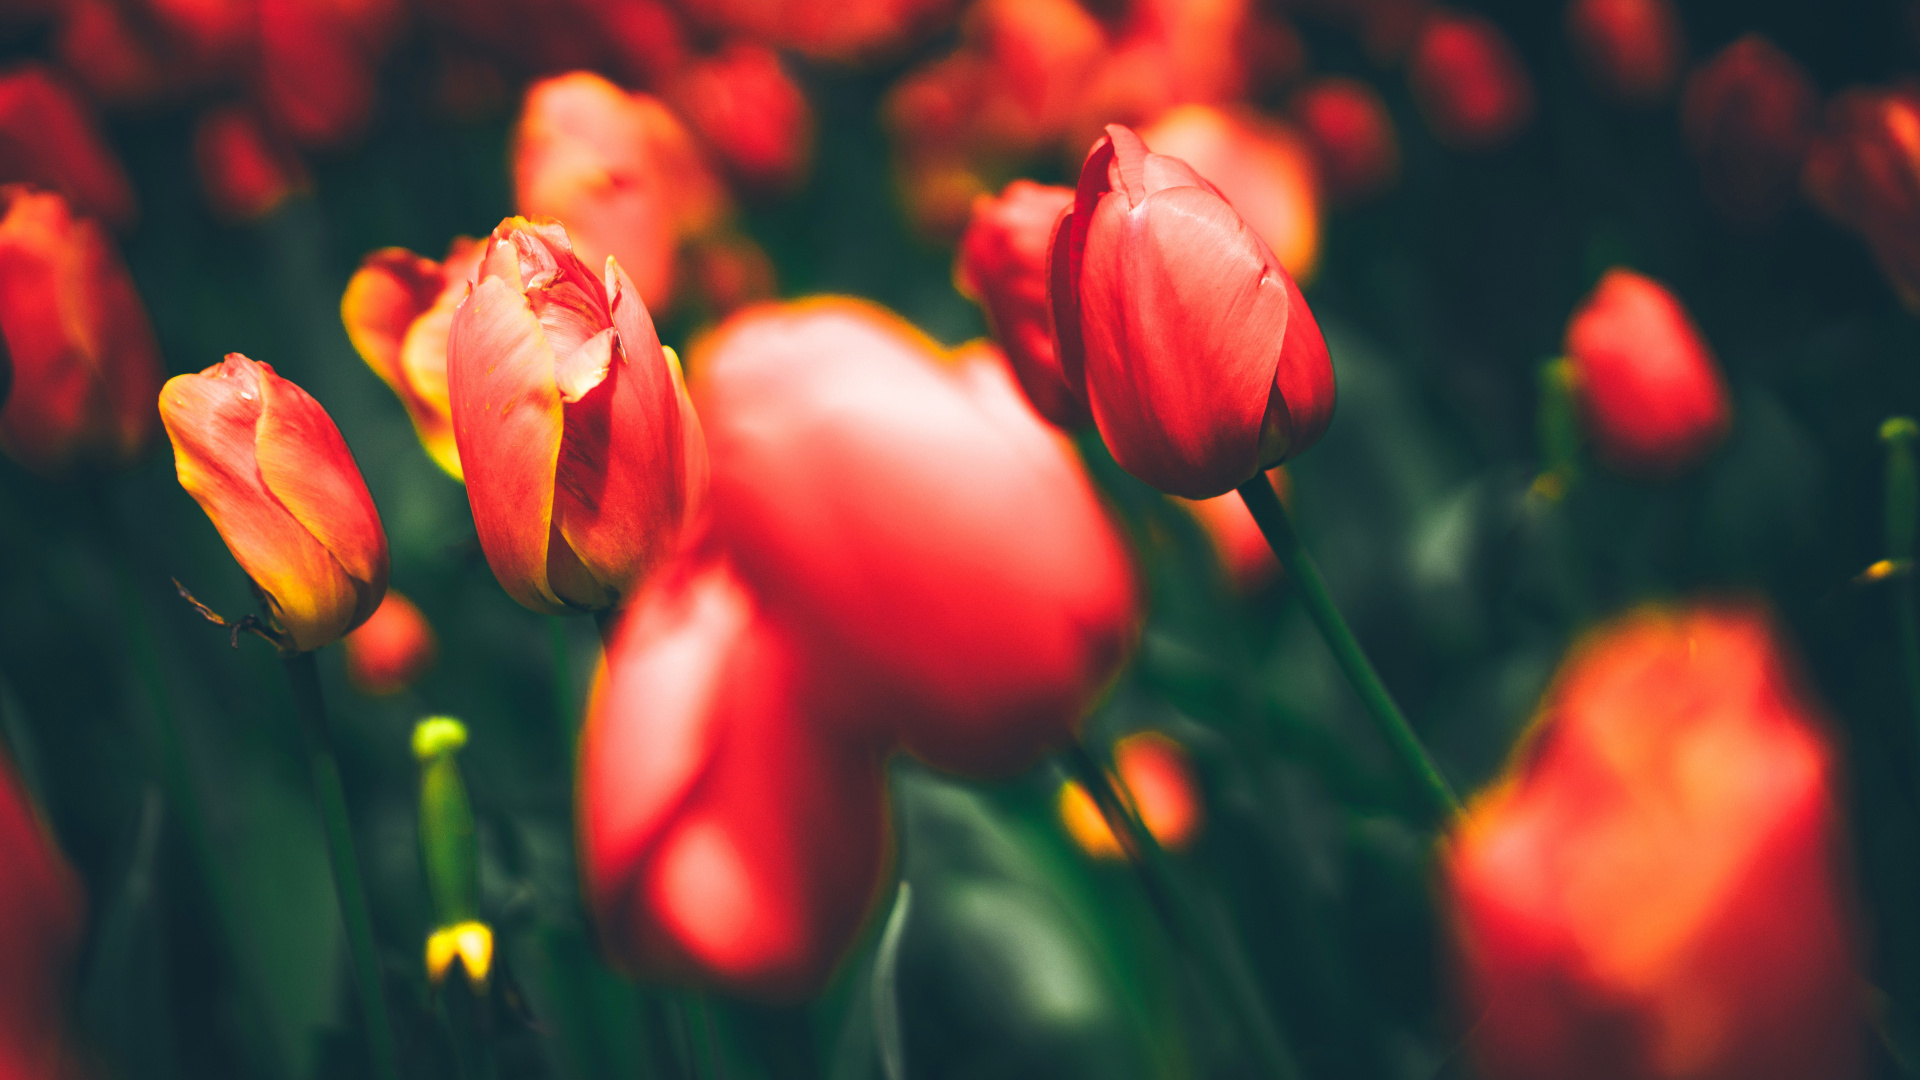 Red Tulips in Bloom During Daytime. Wallpaper in 1920x1080 Resolution